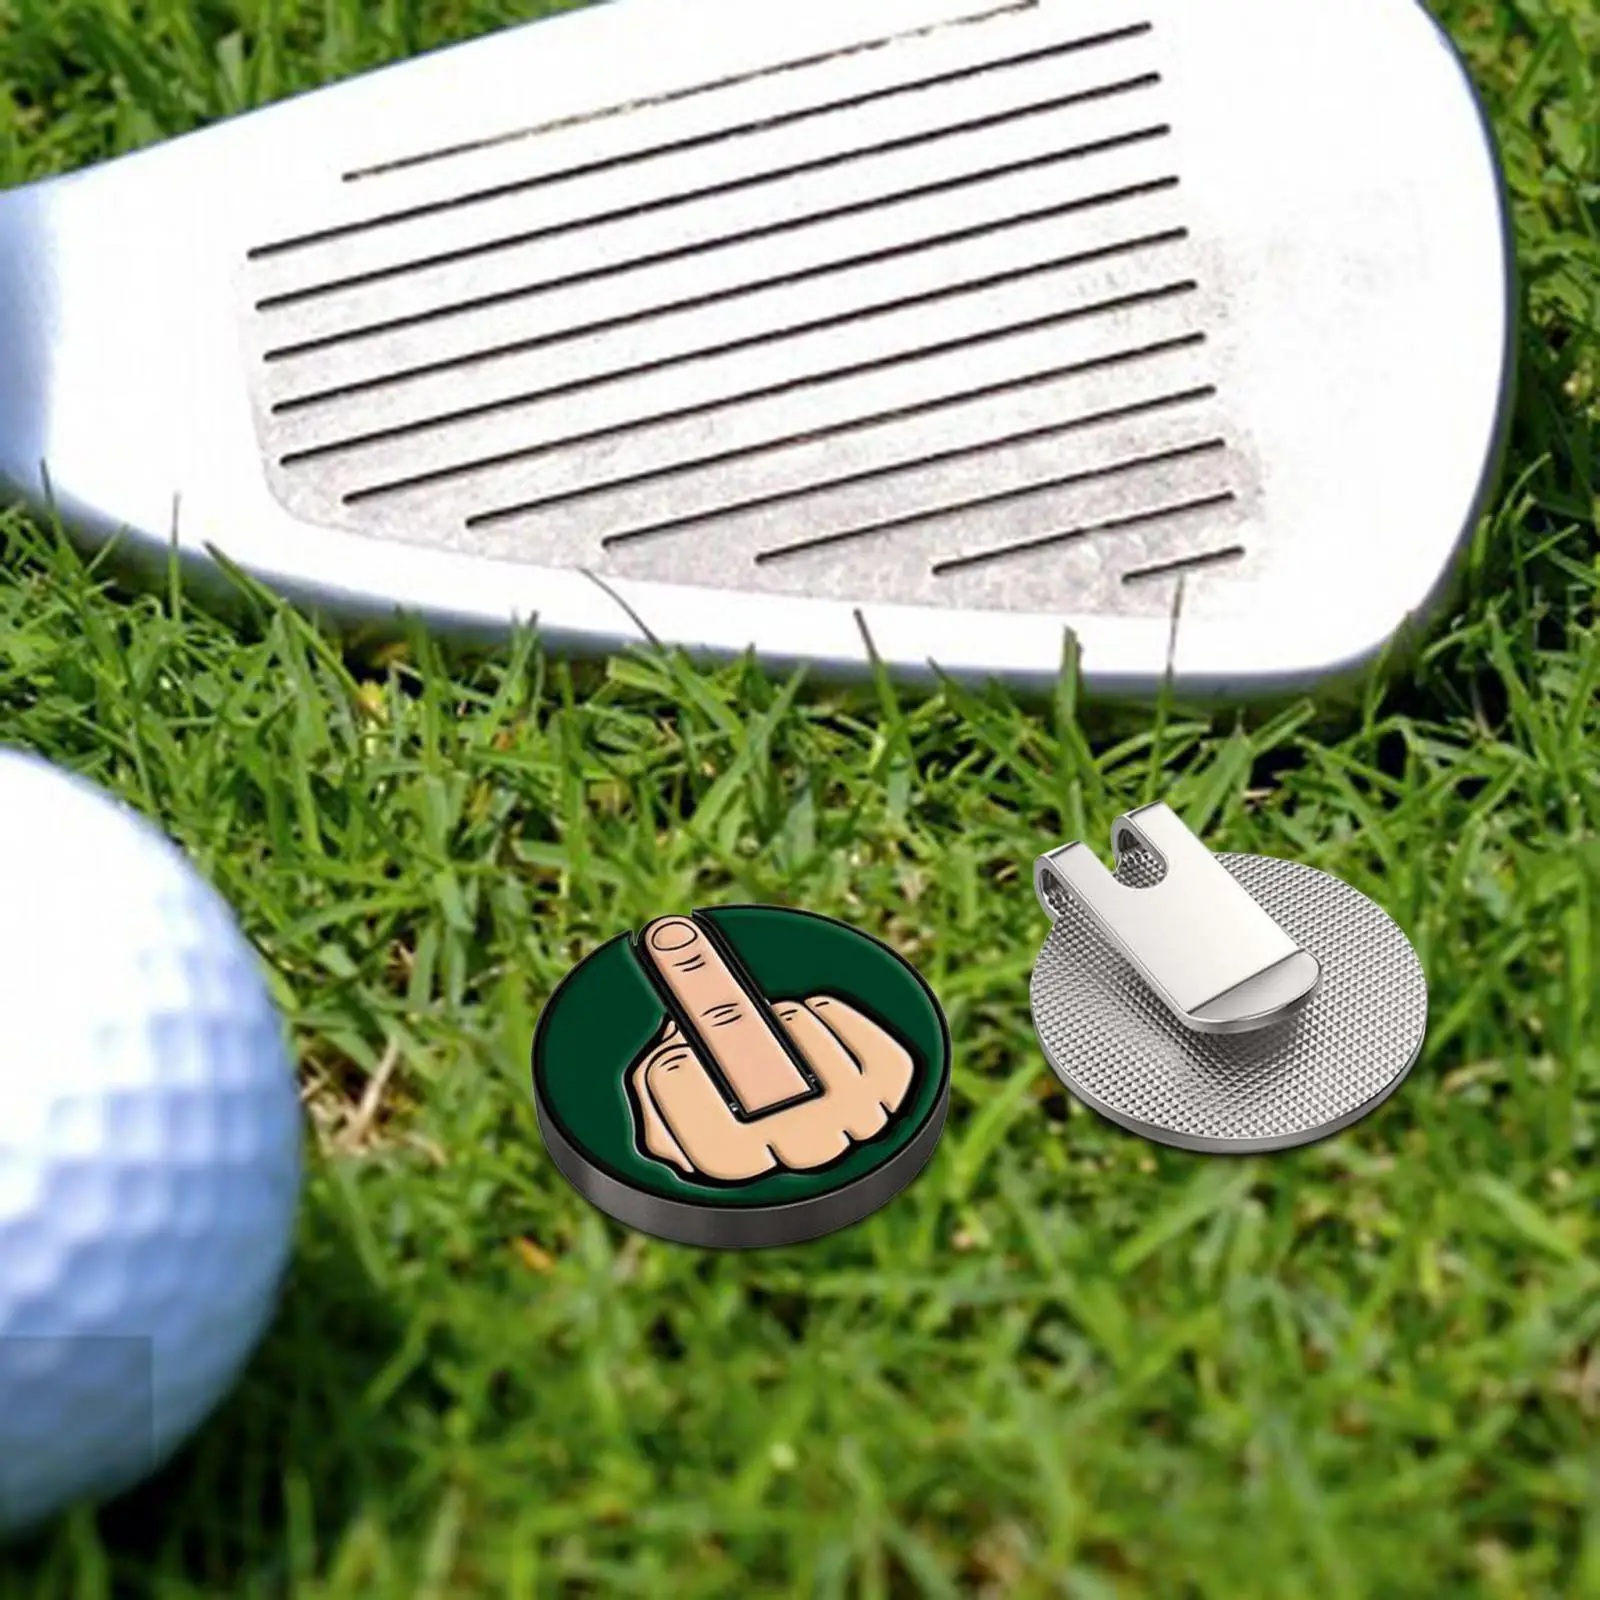 Funny Middle Finger Theme Golf Ball Marker Diameter 2.5cm Great Gift Iron Premiu